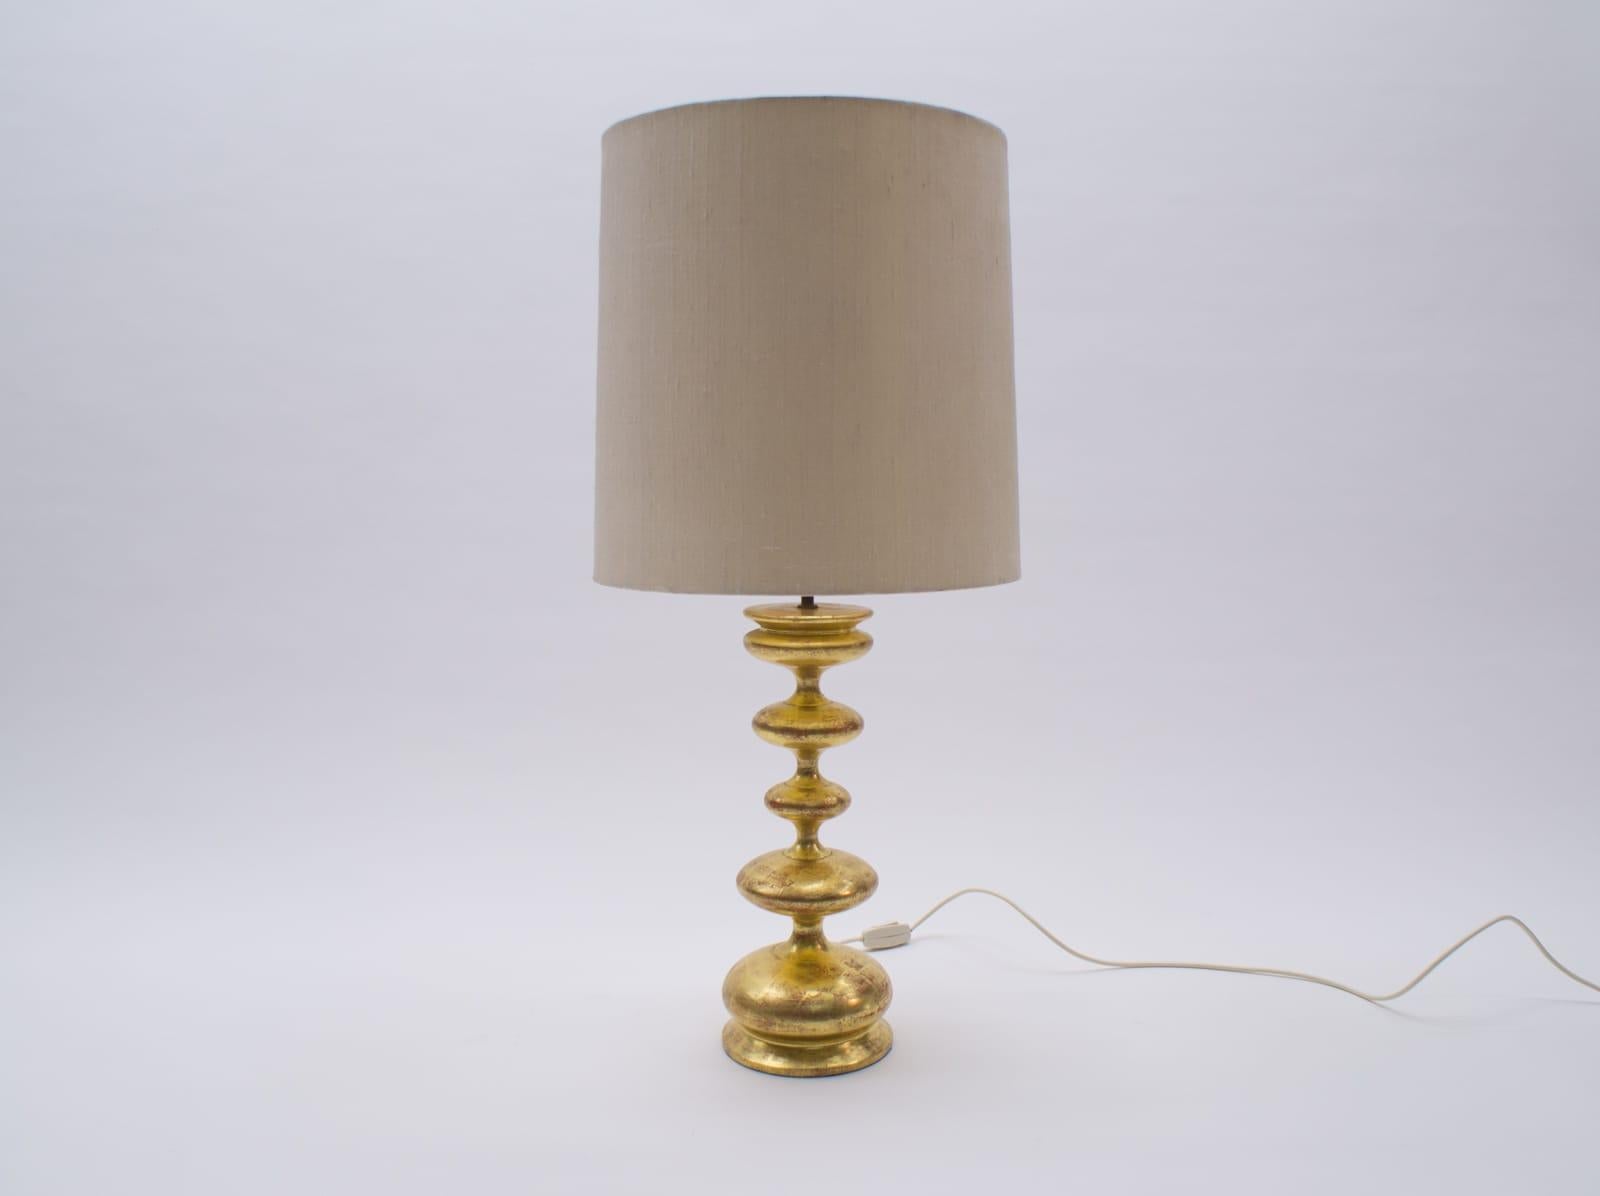 Gilt Large Gold-Plated Italian Table Lamp in Hollywood Regency Style, Italy, 1960s